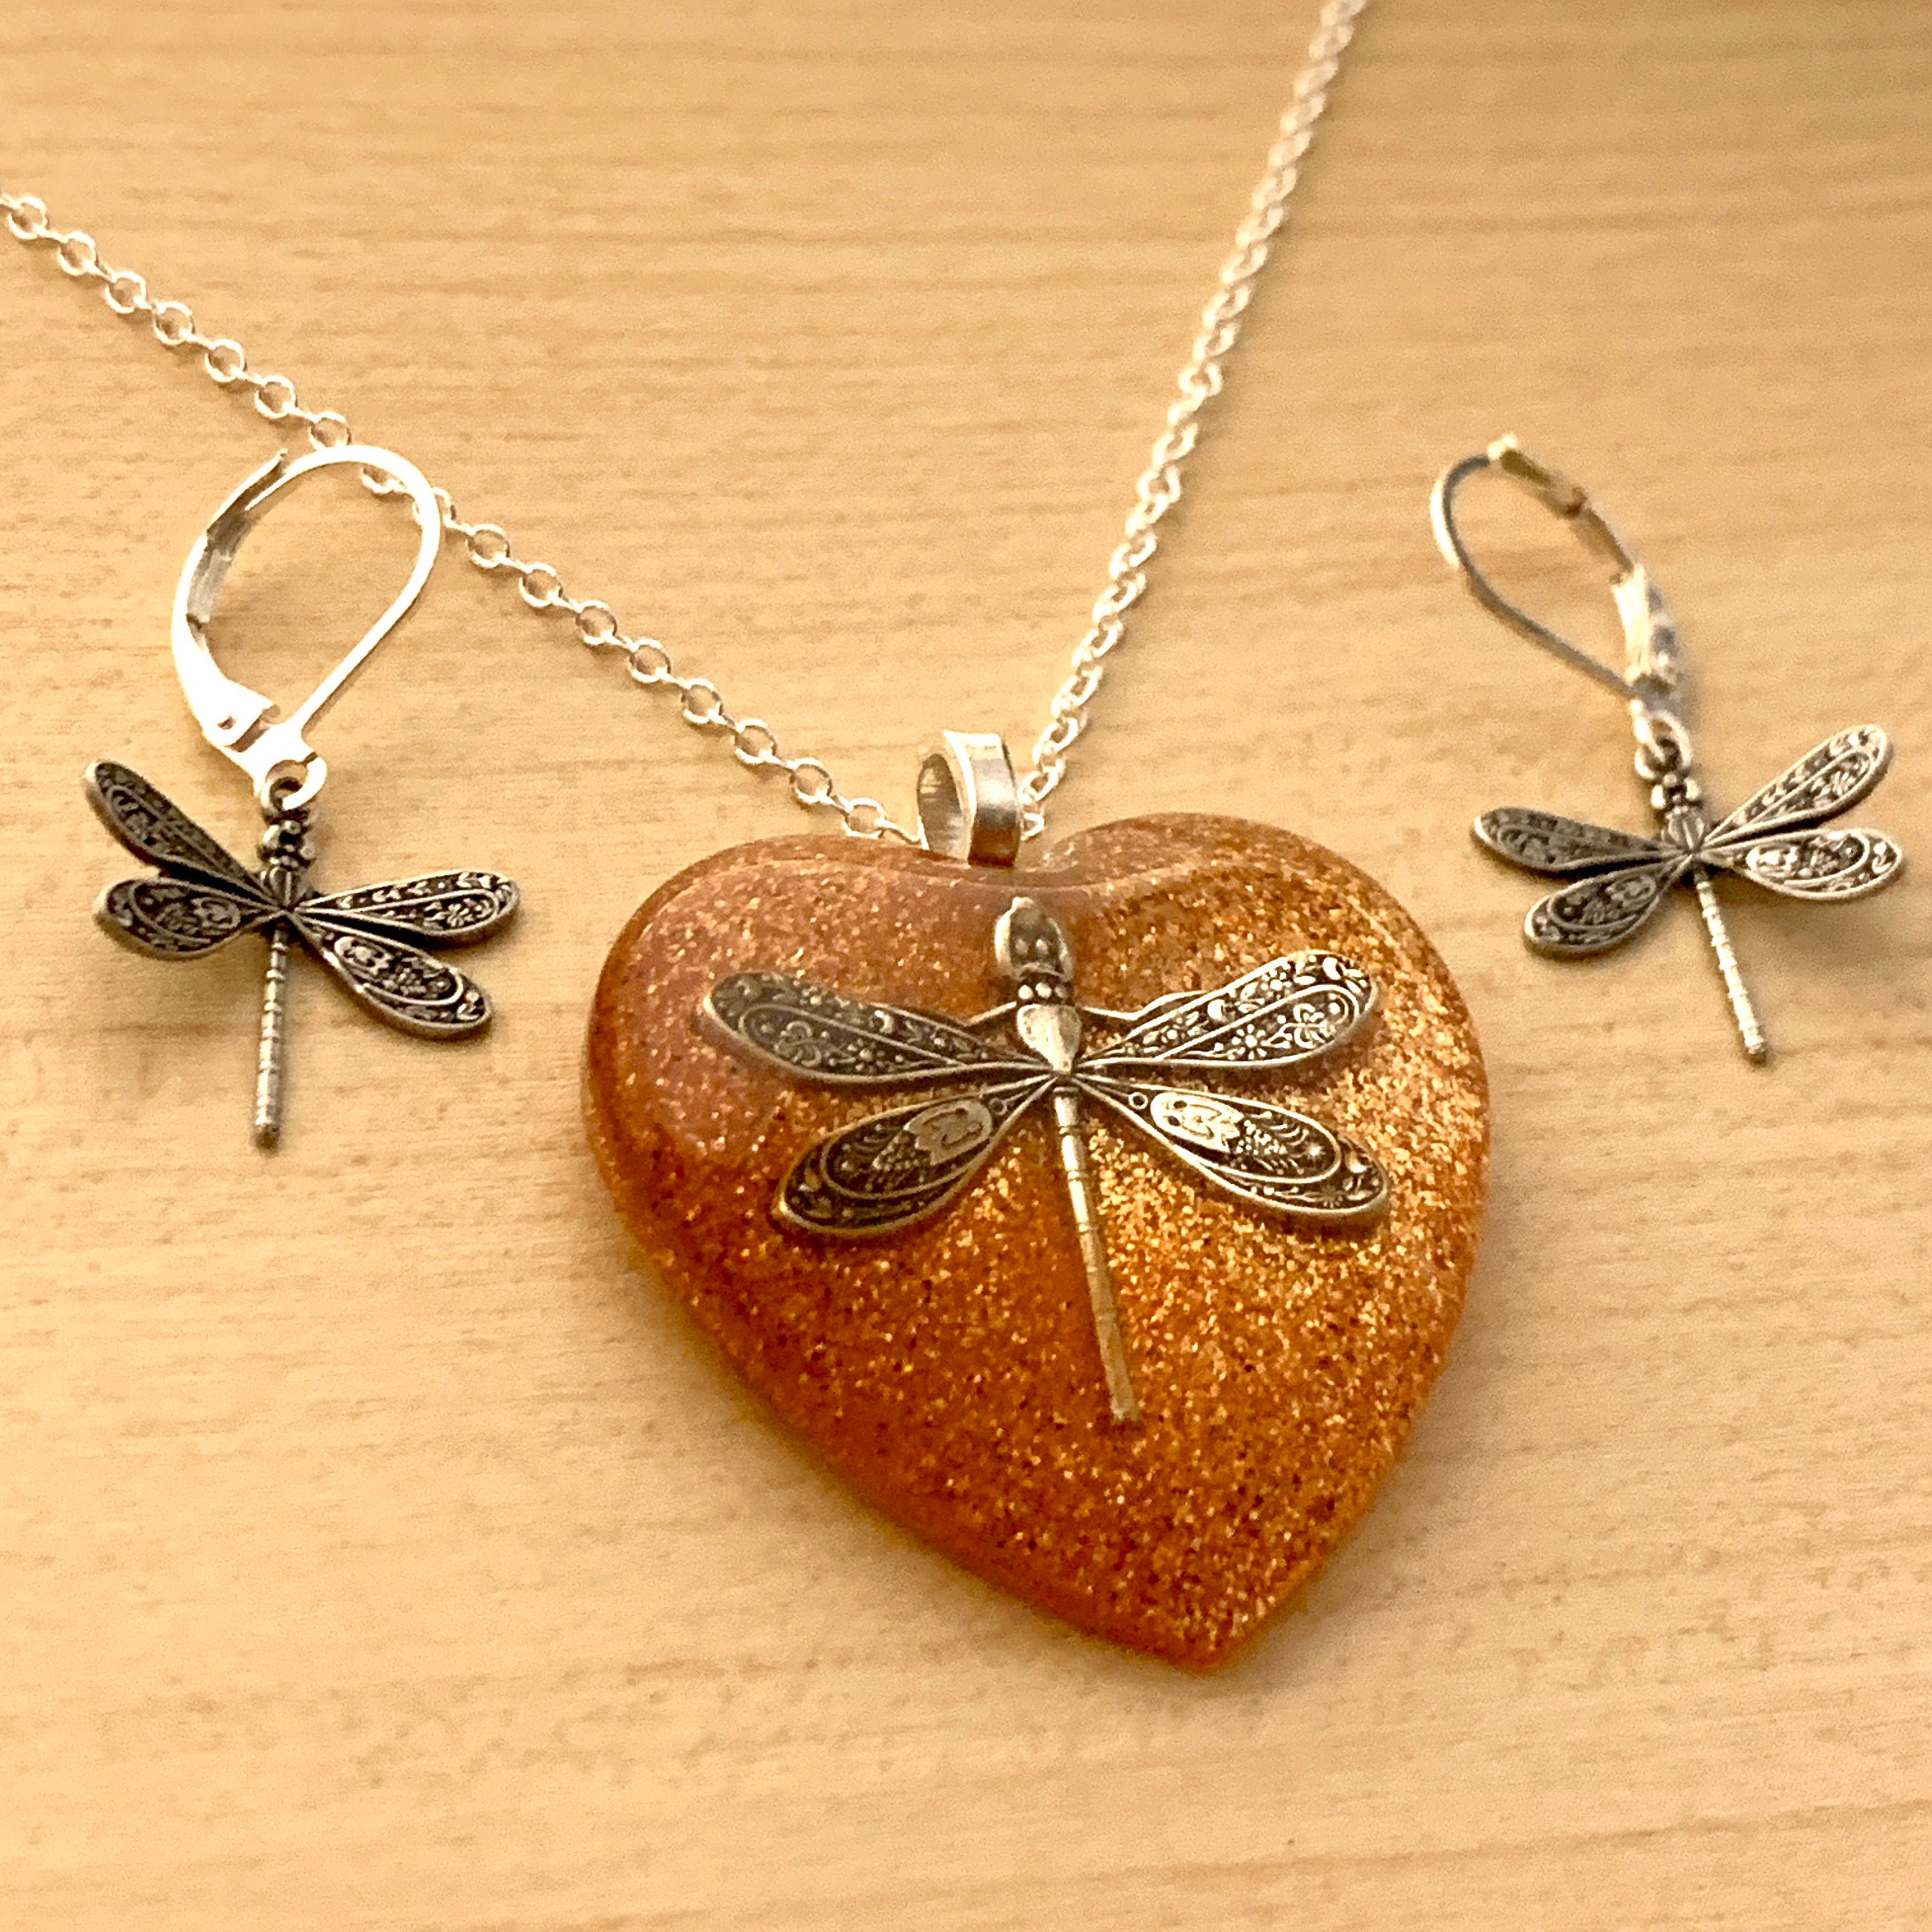 Charming Silver Plated Women Dragonfly Fireworks Grapes Heart Necklace Pendant 